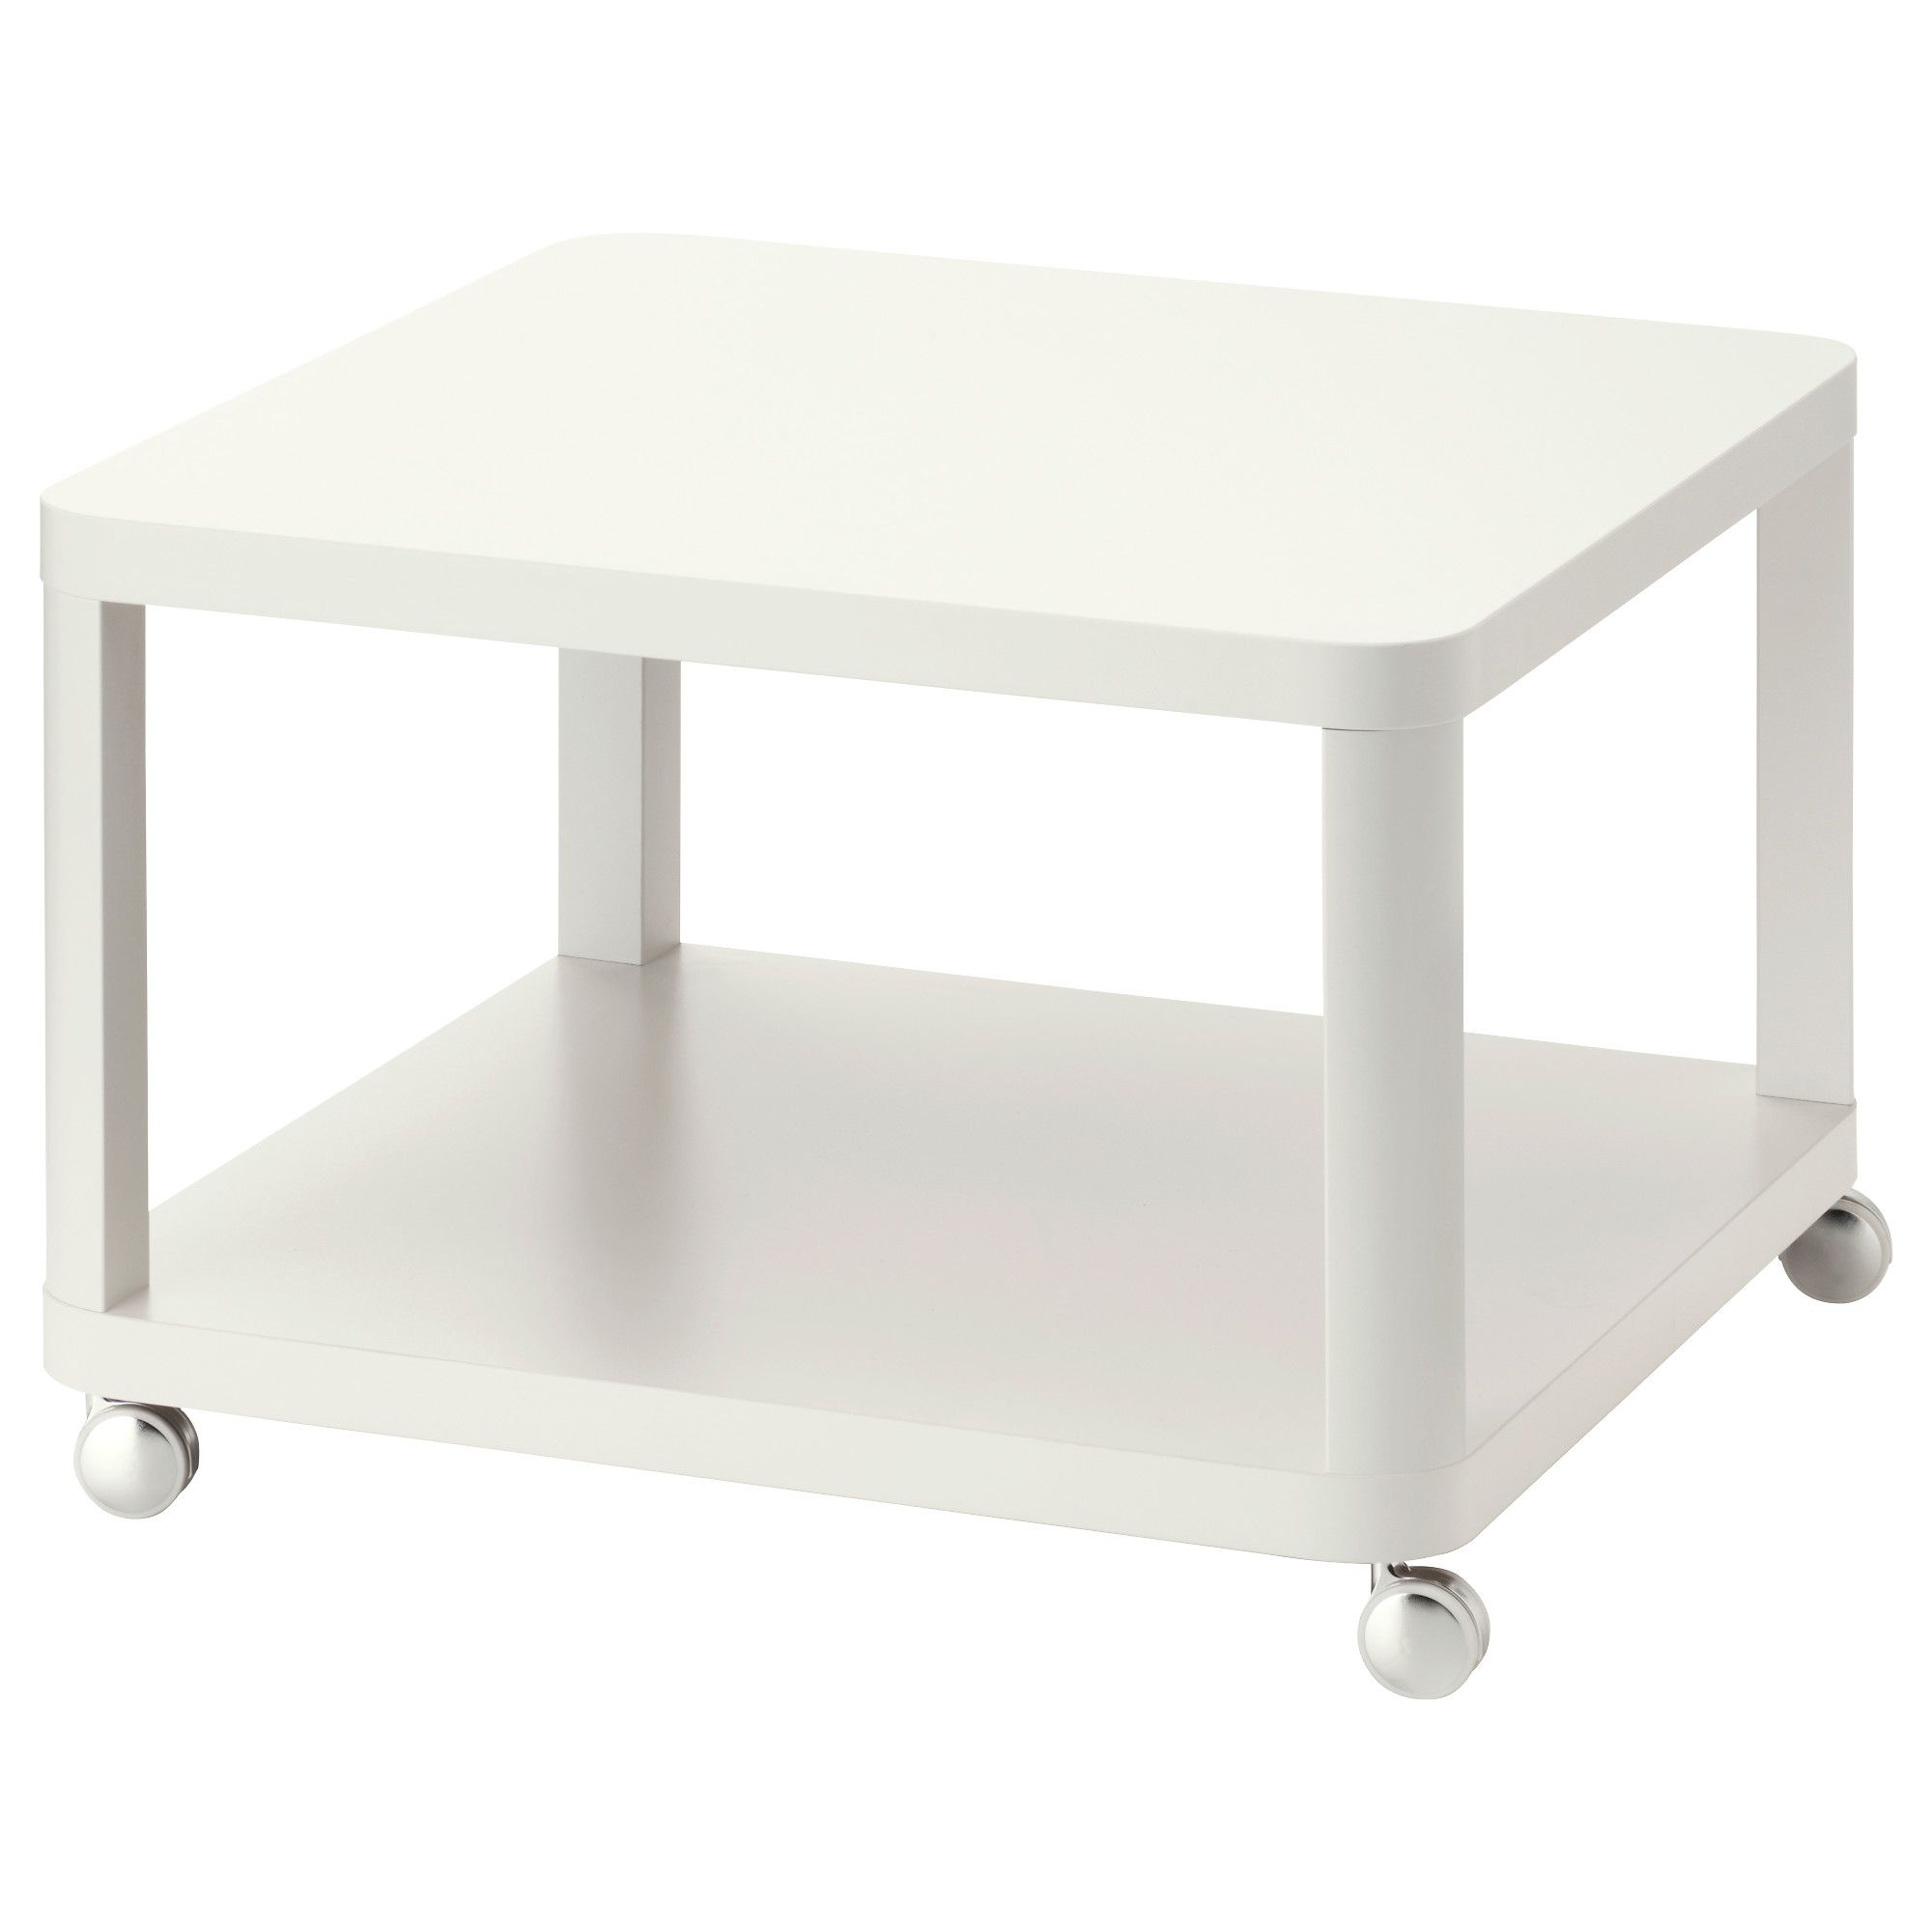 Tingby Side Table On Castors White 64x64 Cm | Ikea Lietuva Regarding Coffee Tables With Casters (View 10 of 15)